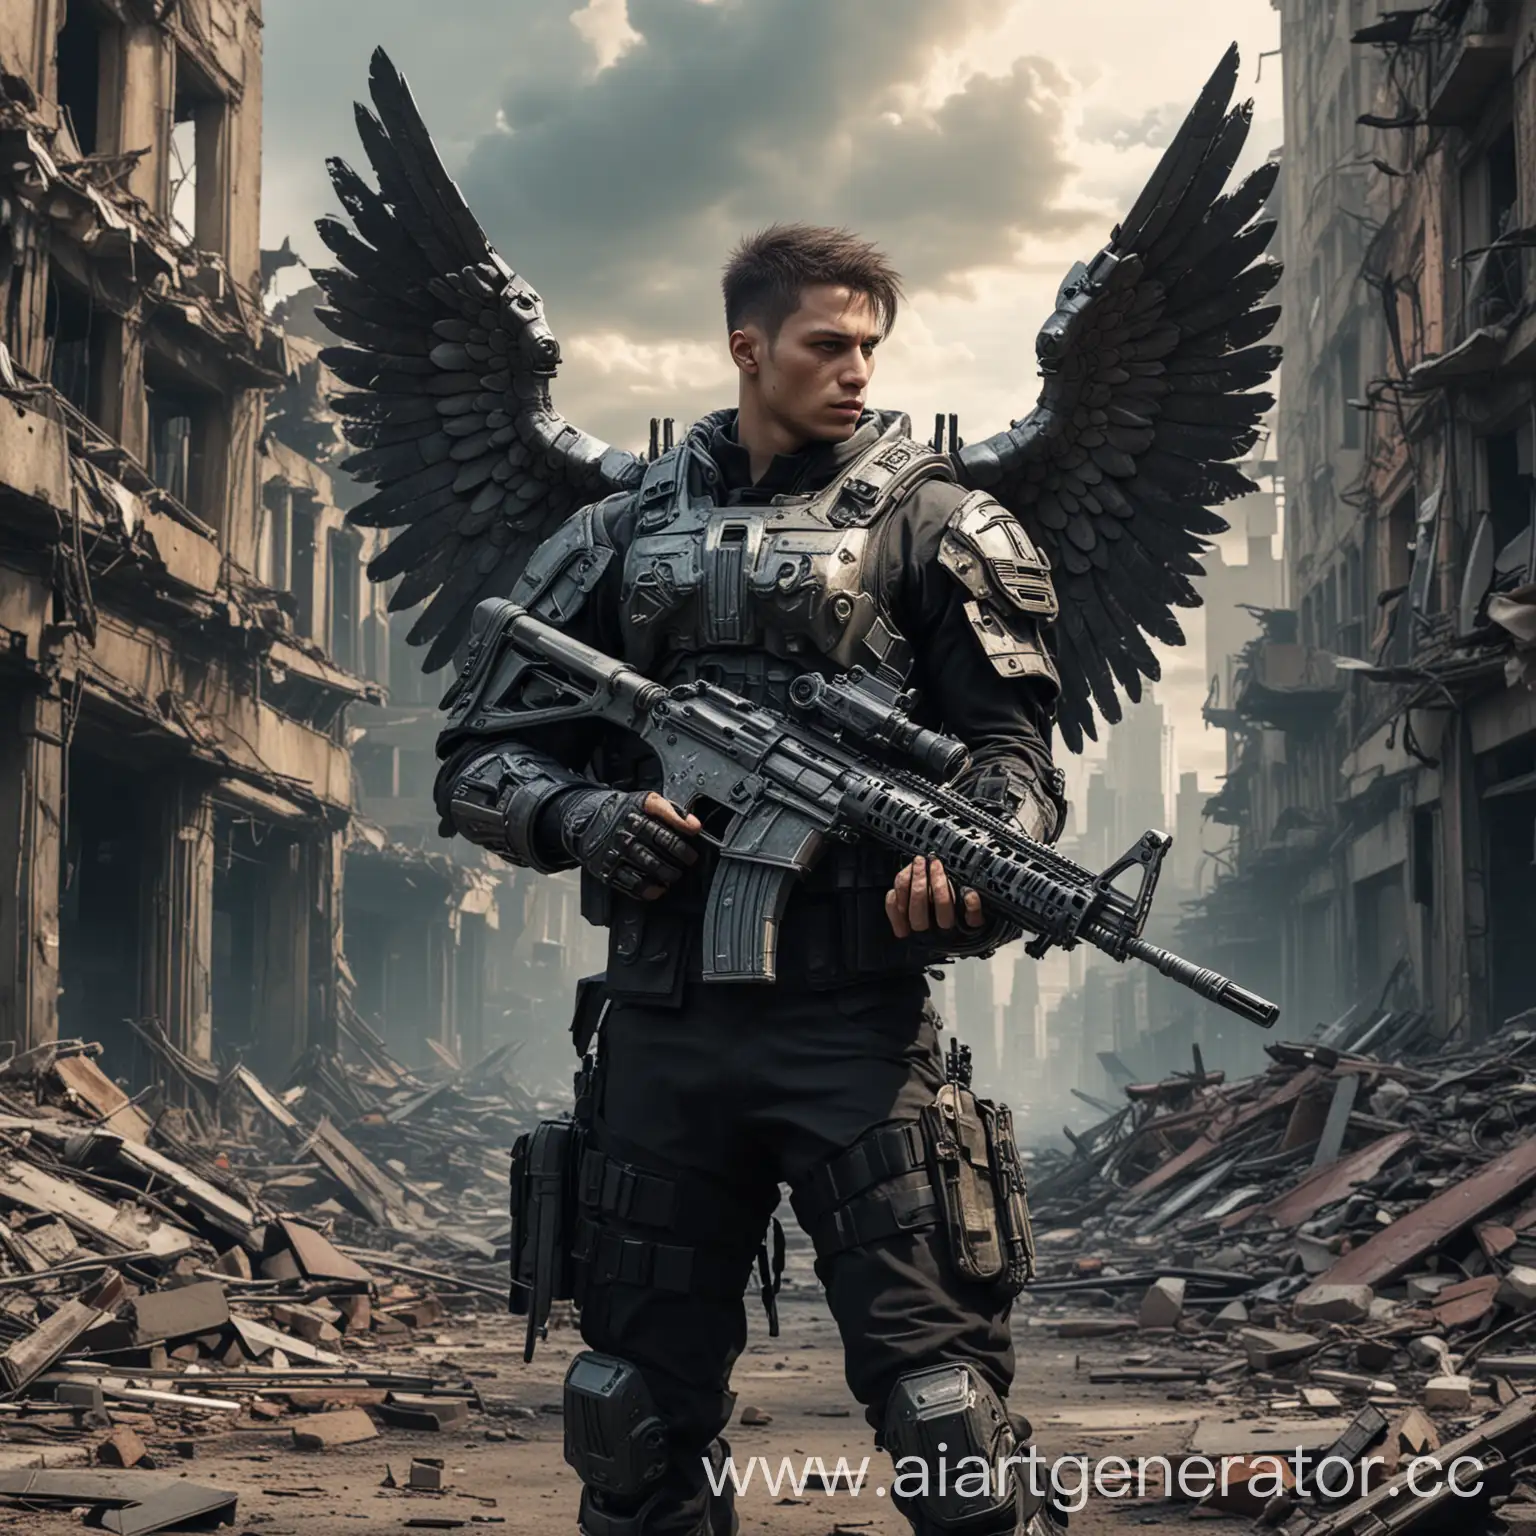 Archangel-Michael-defending-cyberpunk-city-ruins-with-automatic-rifle